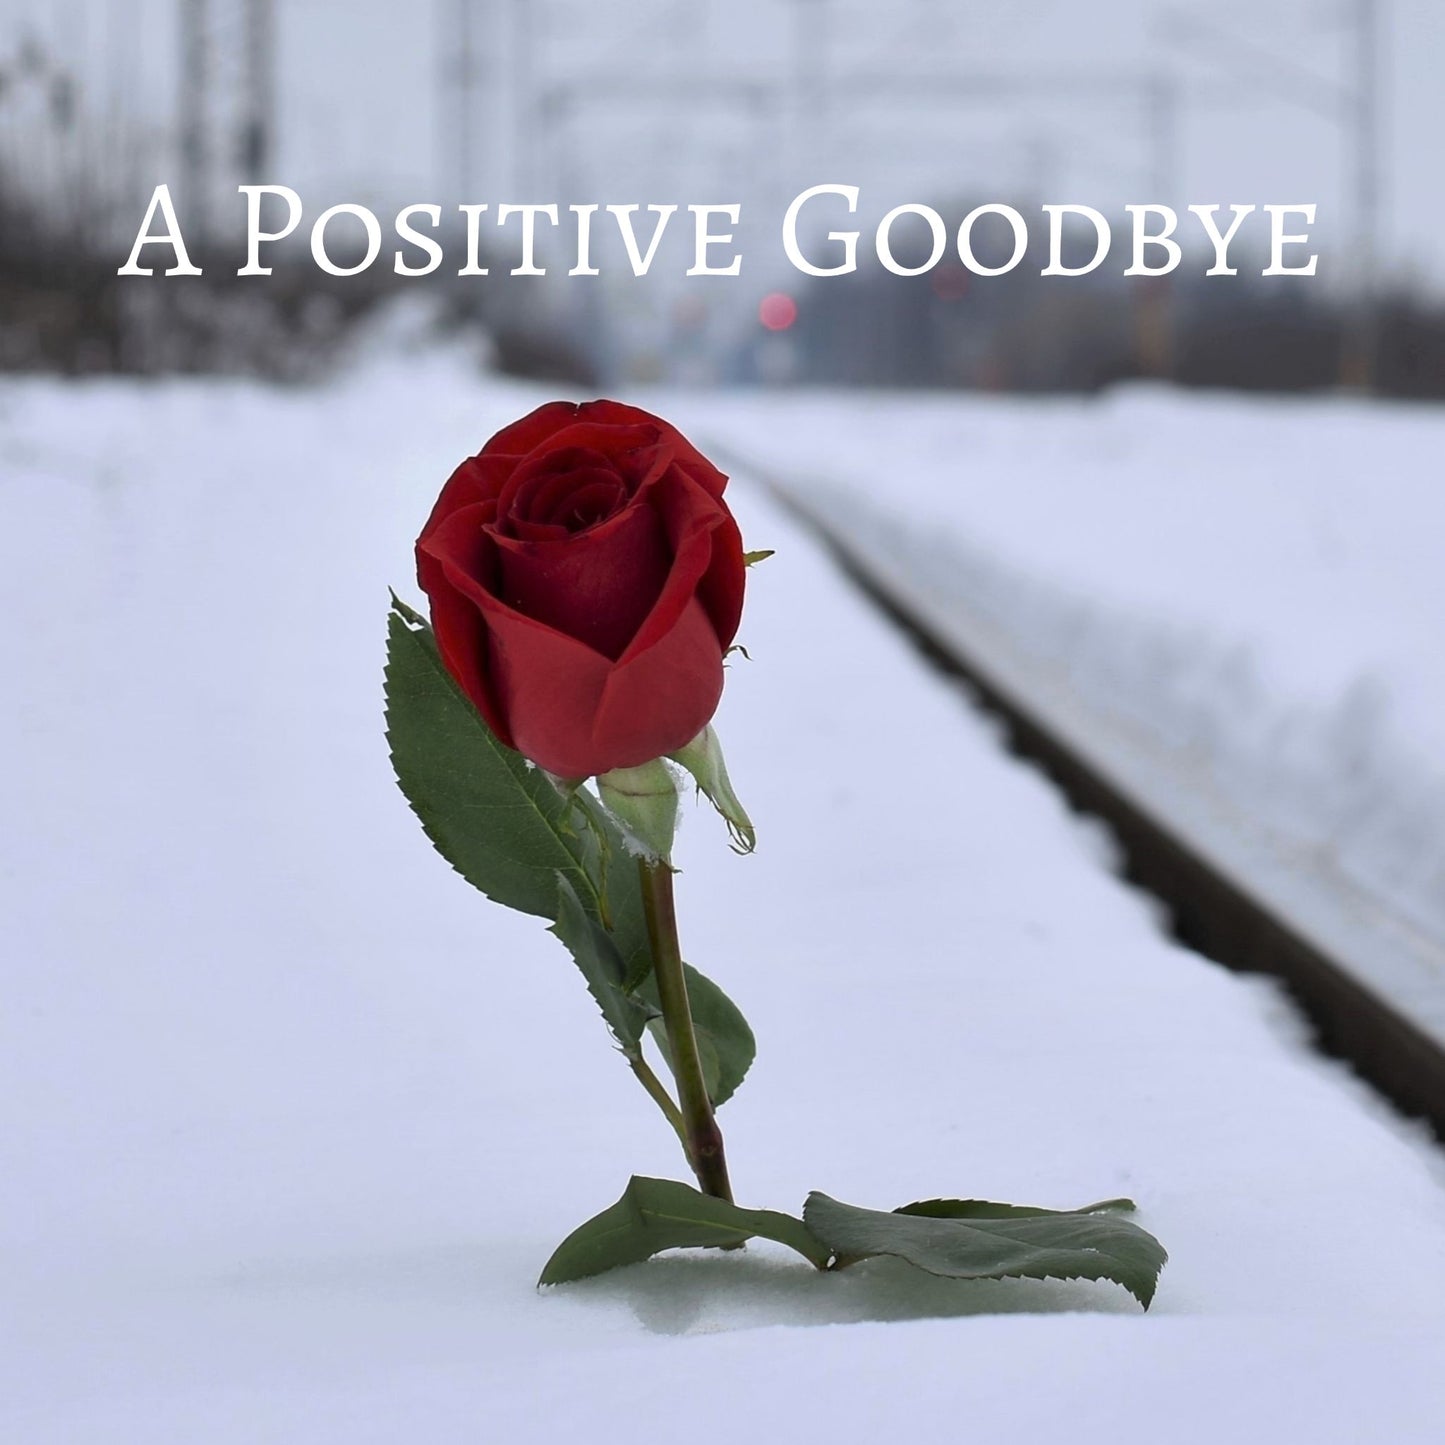 CD Cover of song A Positive Goodbye